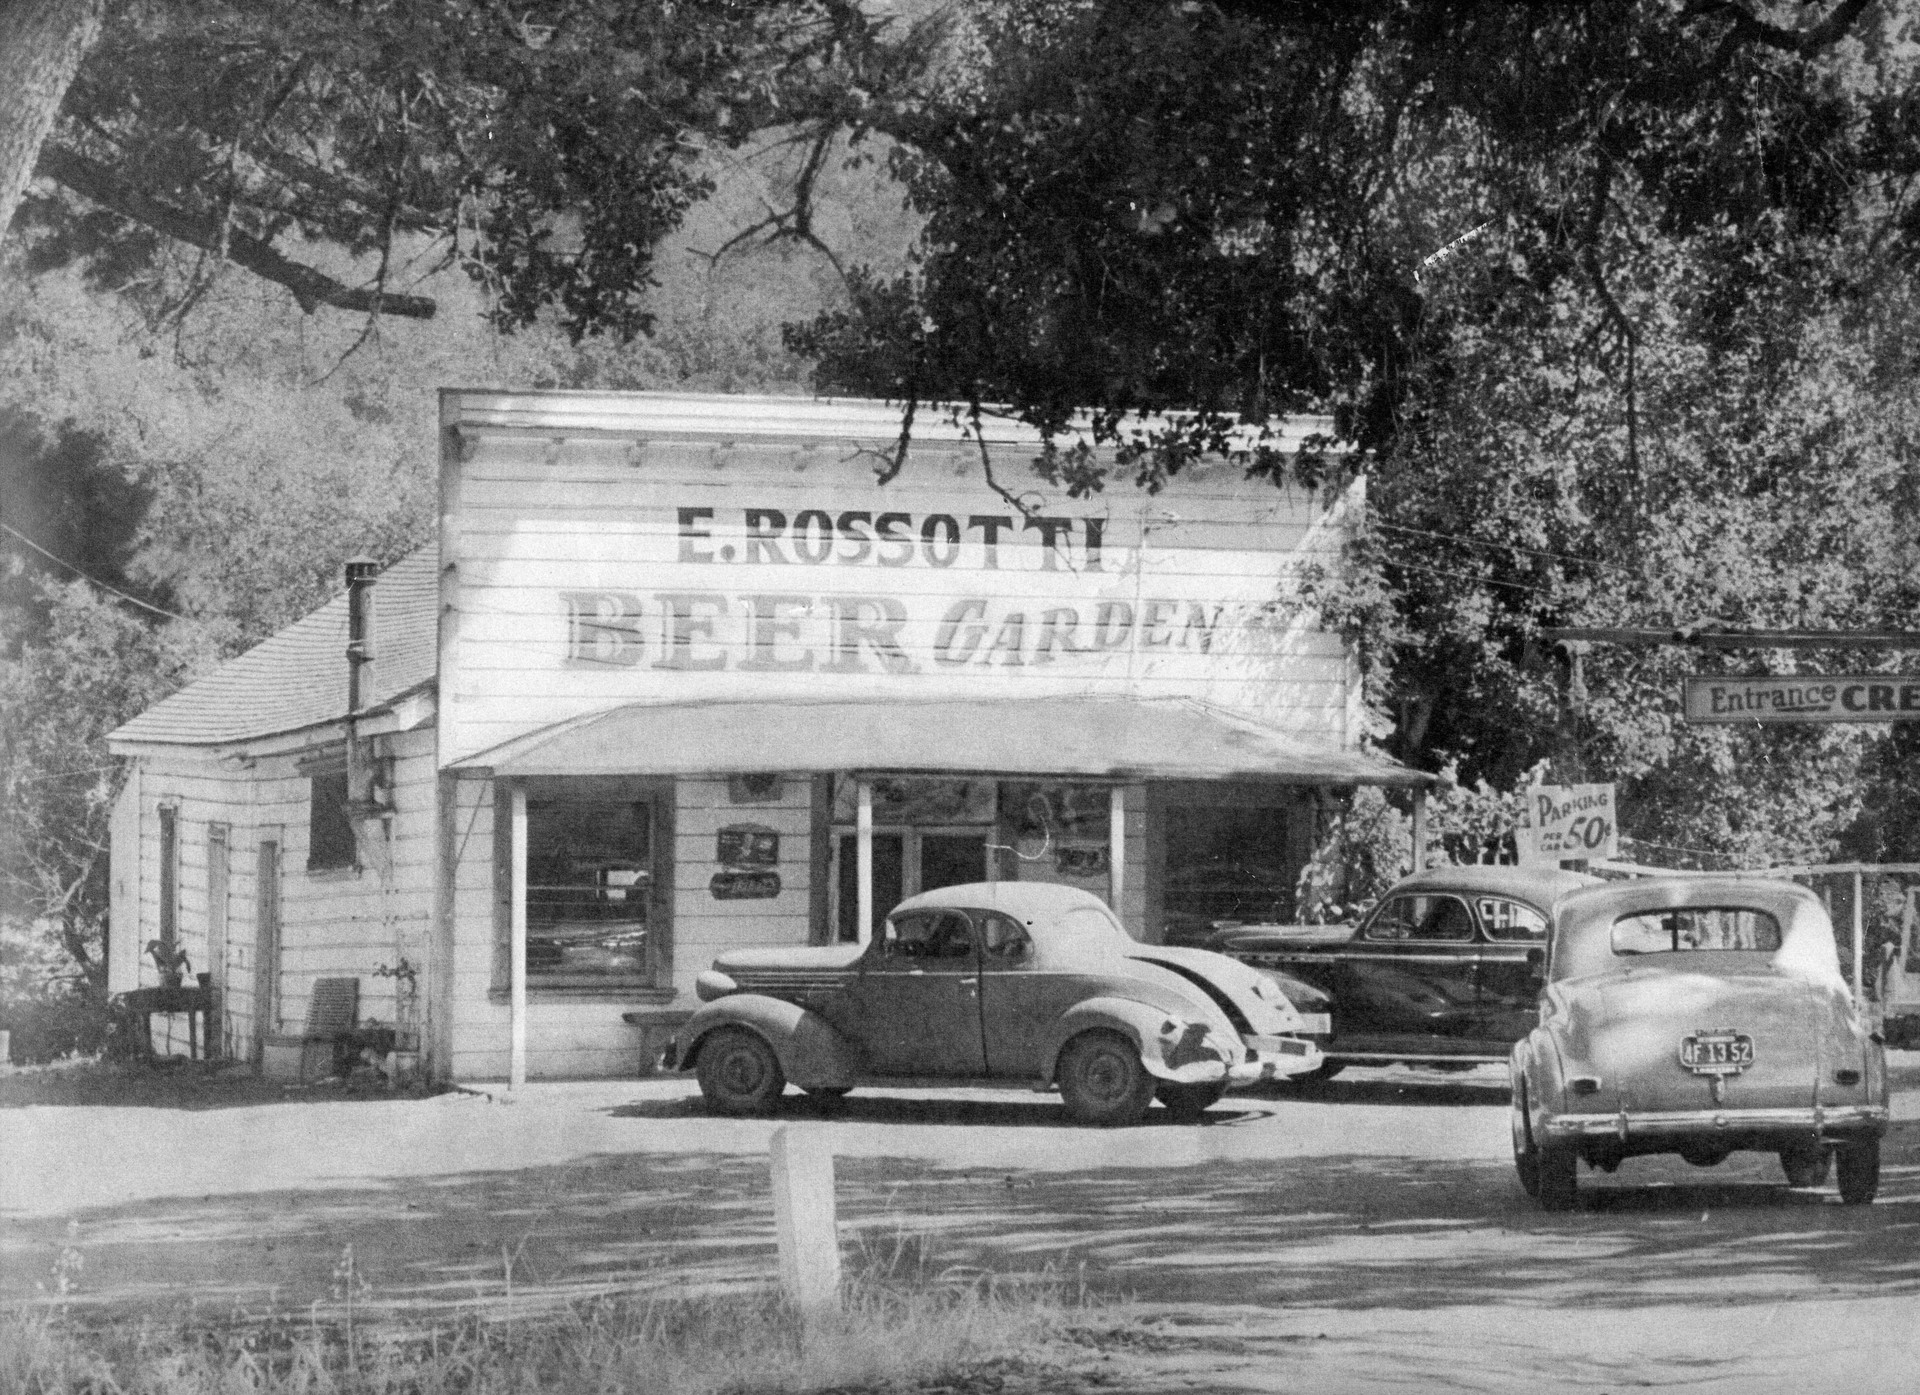 When Prohibition ended in 1933, Enrico Rossotti got the lease, then purchased the property and ran what was then called E. Rossotti's Beer Garden until 1956. With the addition of burgers and similar grill food, it became a local hotspot for Stanford fans year-round, but especially during football season.